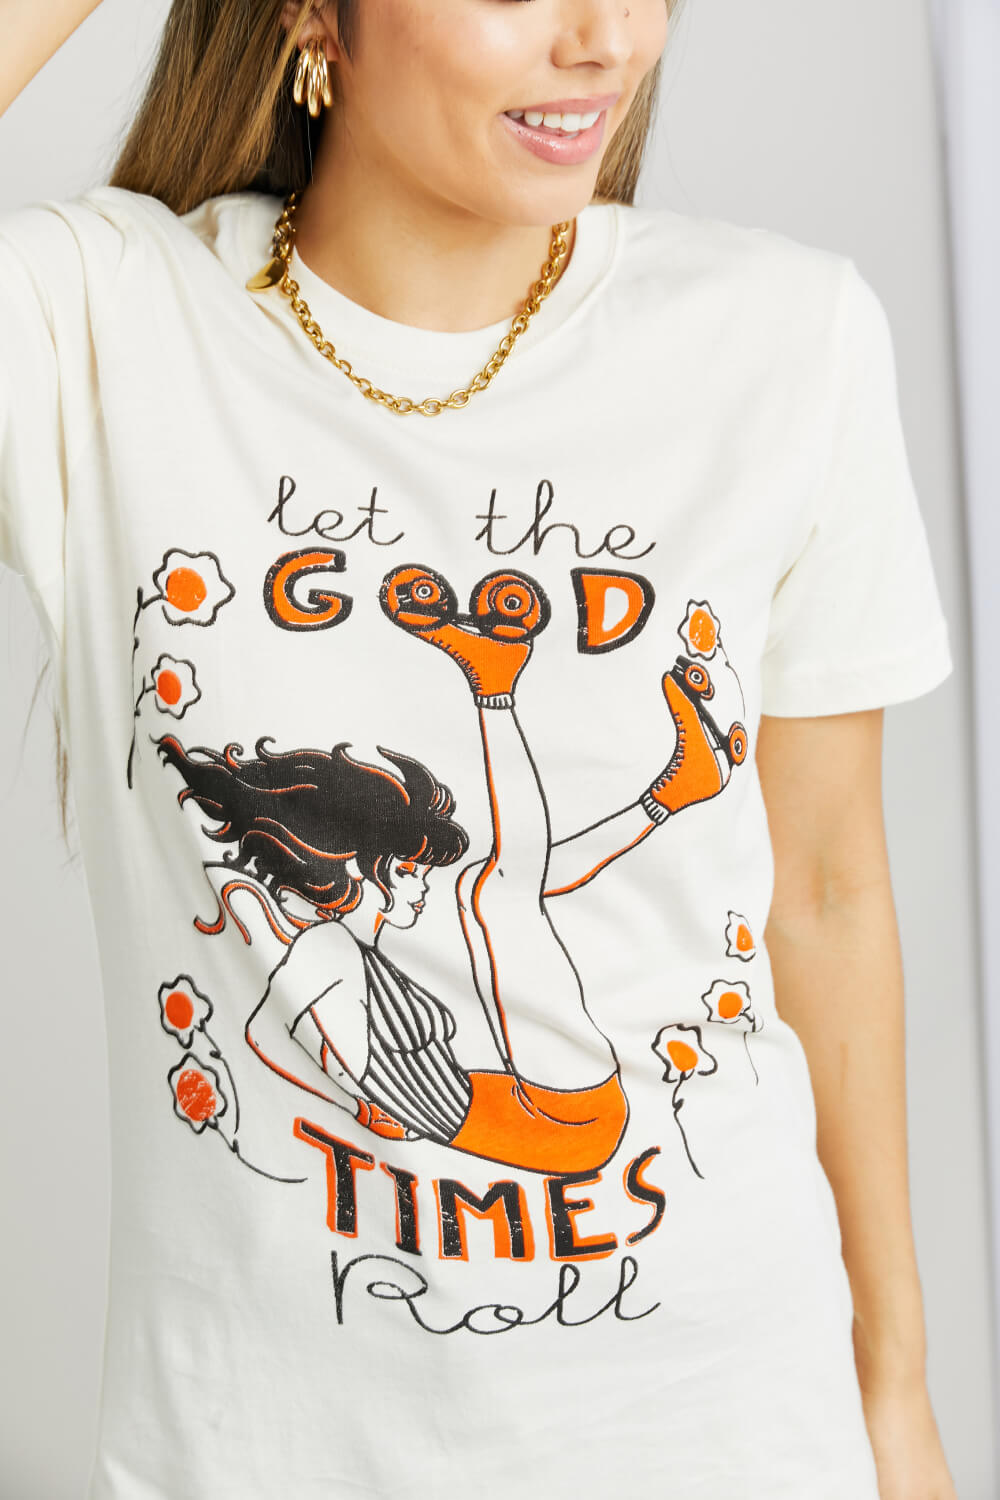 Women's mineB Full Size LET THE GOOD TIMES ROLL Graphic Tee